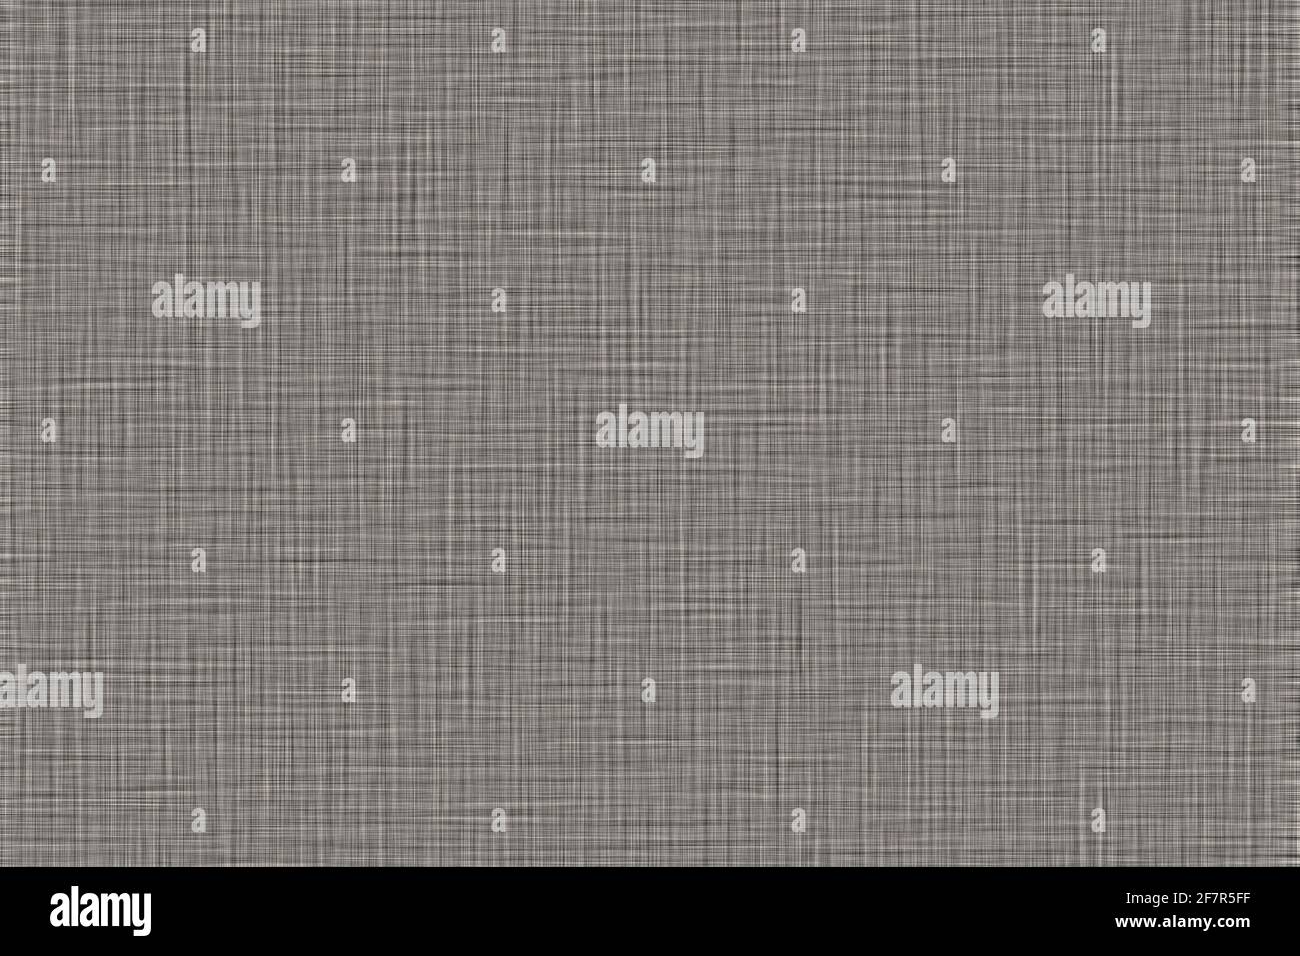 Abstract big digital background with thin sharp orthogonal lines in light and dark shades of gray with warm sepia hue as a modern fabric texture Stock Photo